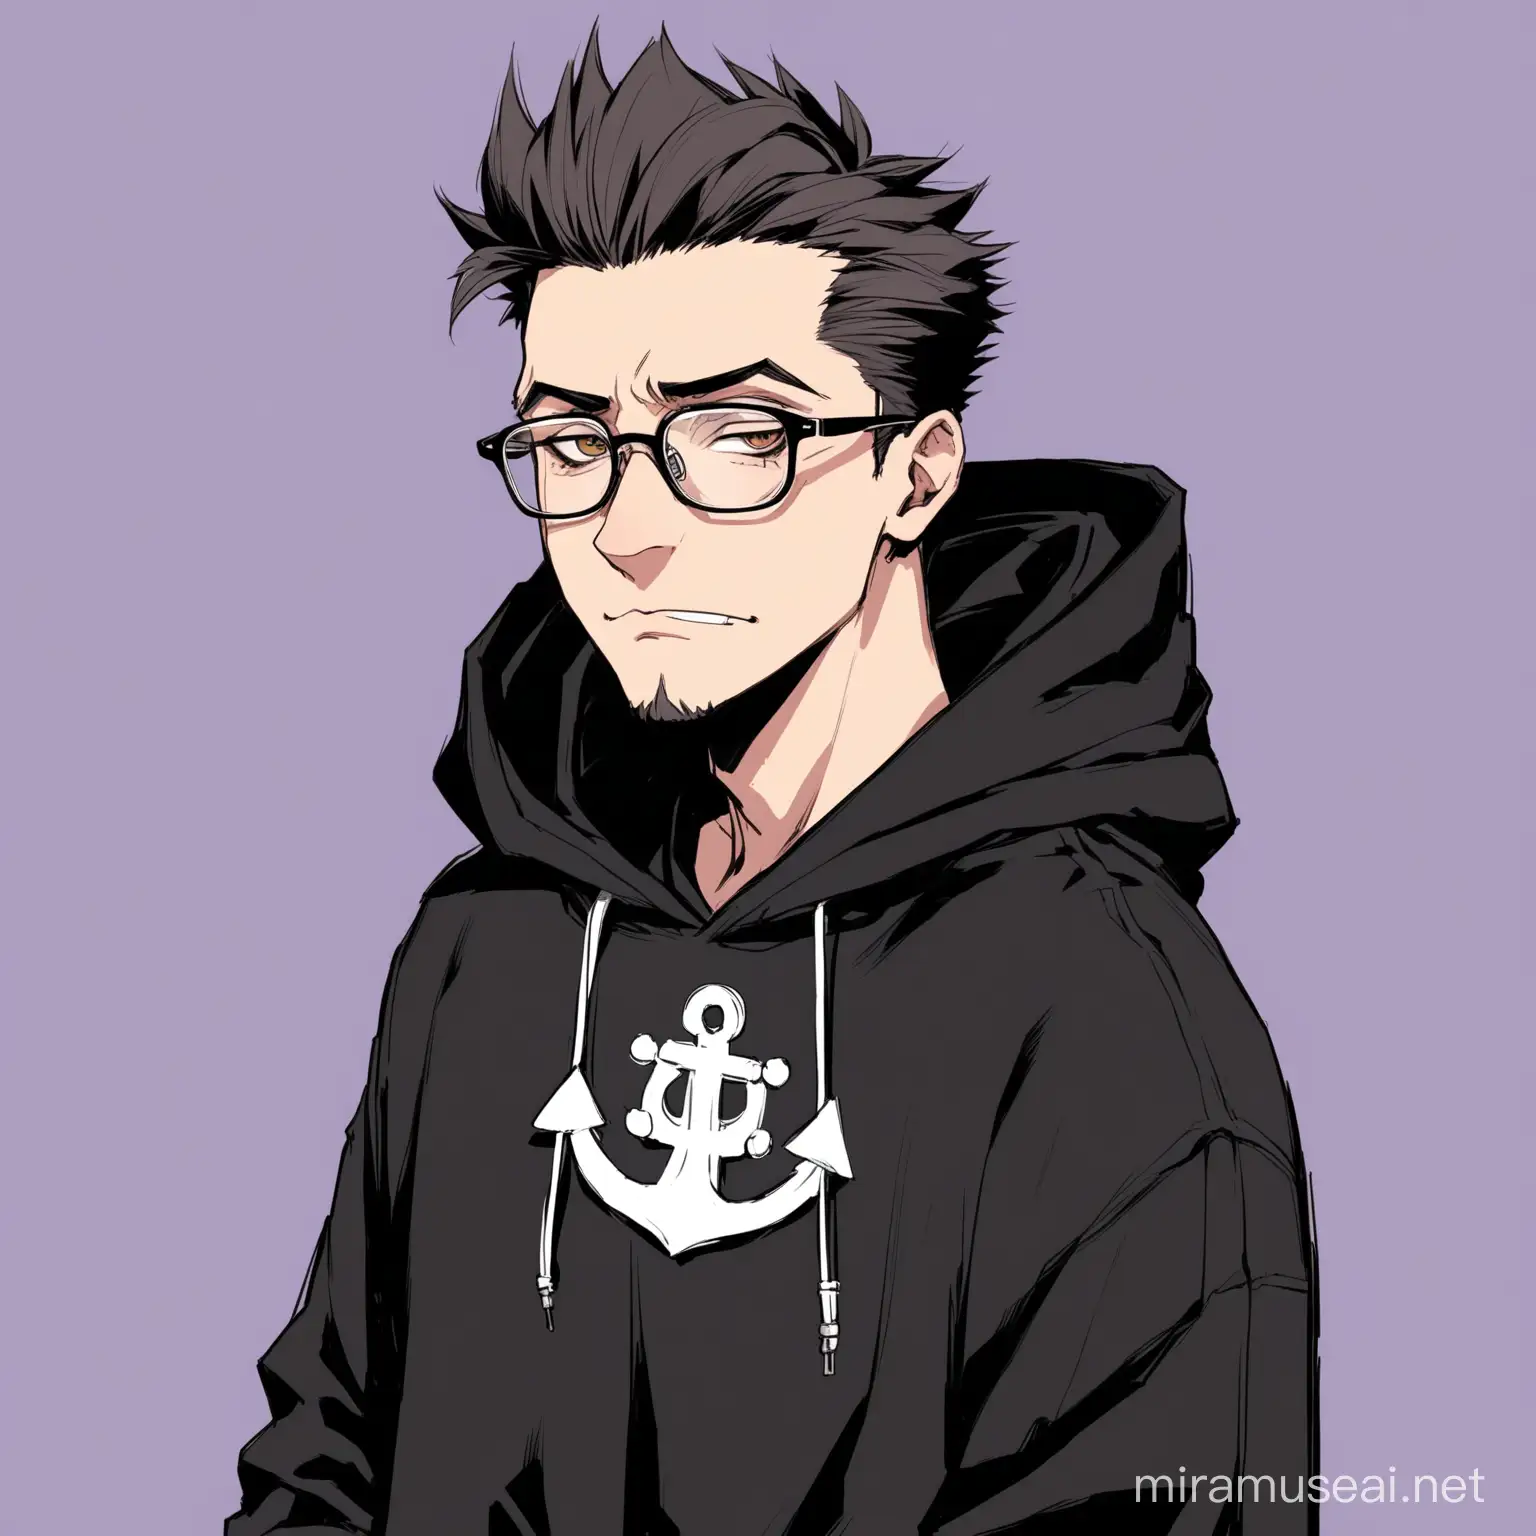 Stylish Hacker in Black Hoodie with Quiff Hair and Glasses